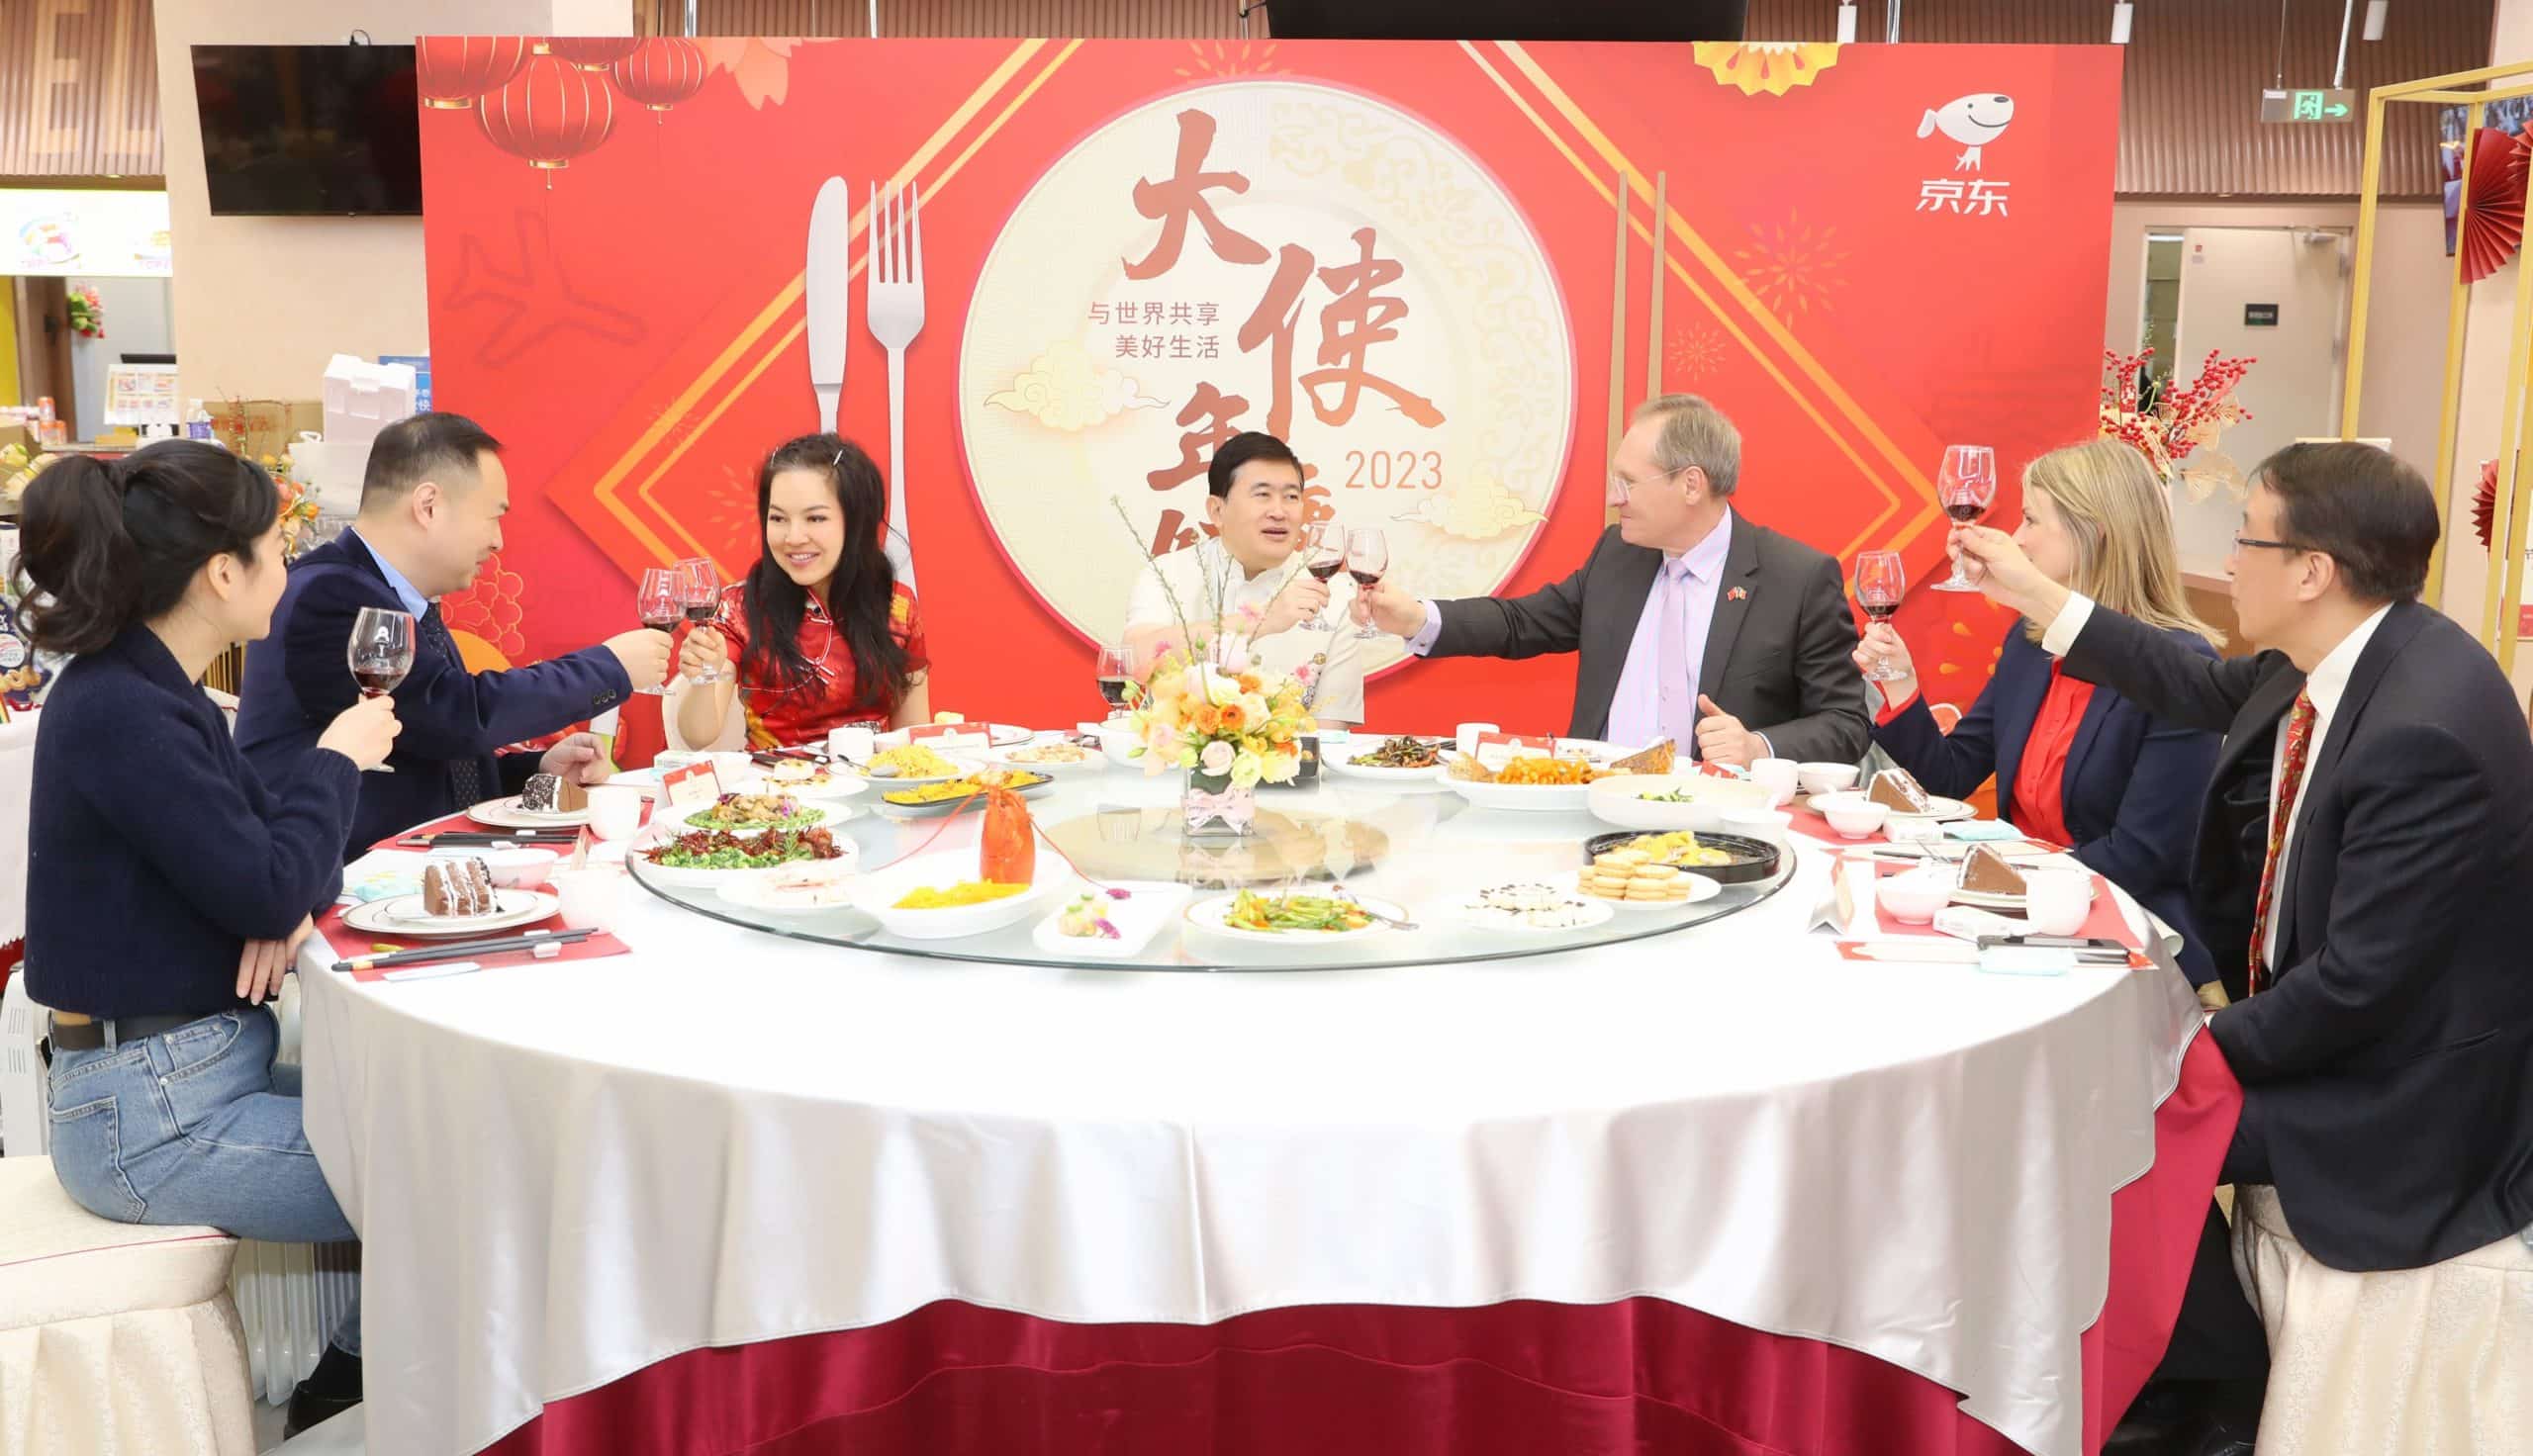 Ambassadors Experience Chinese New Year Shopping and Meal at JD.com